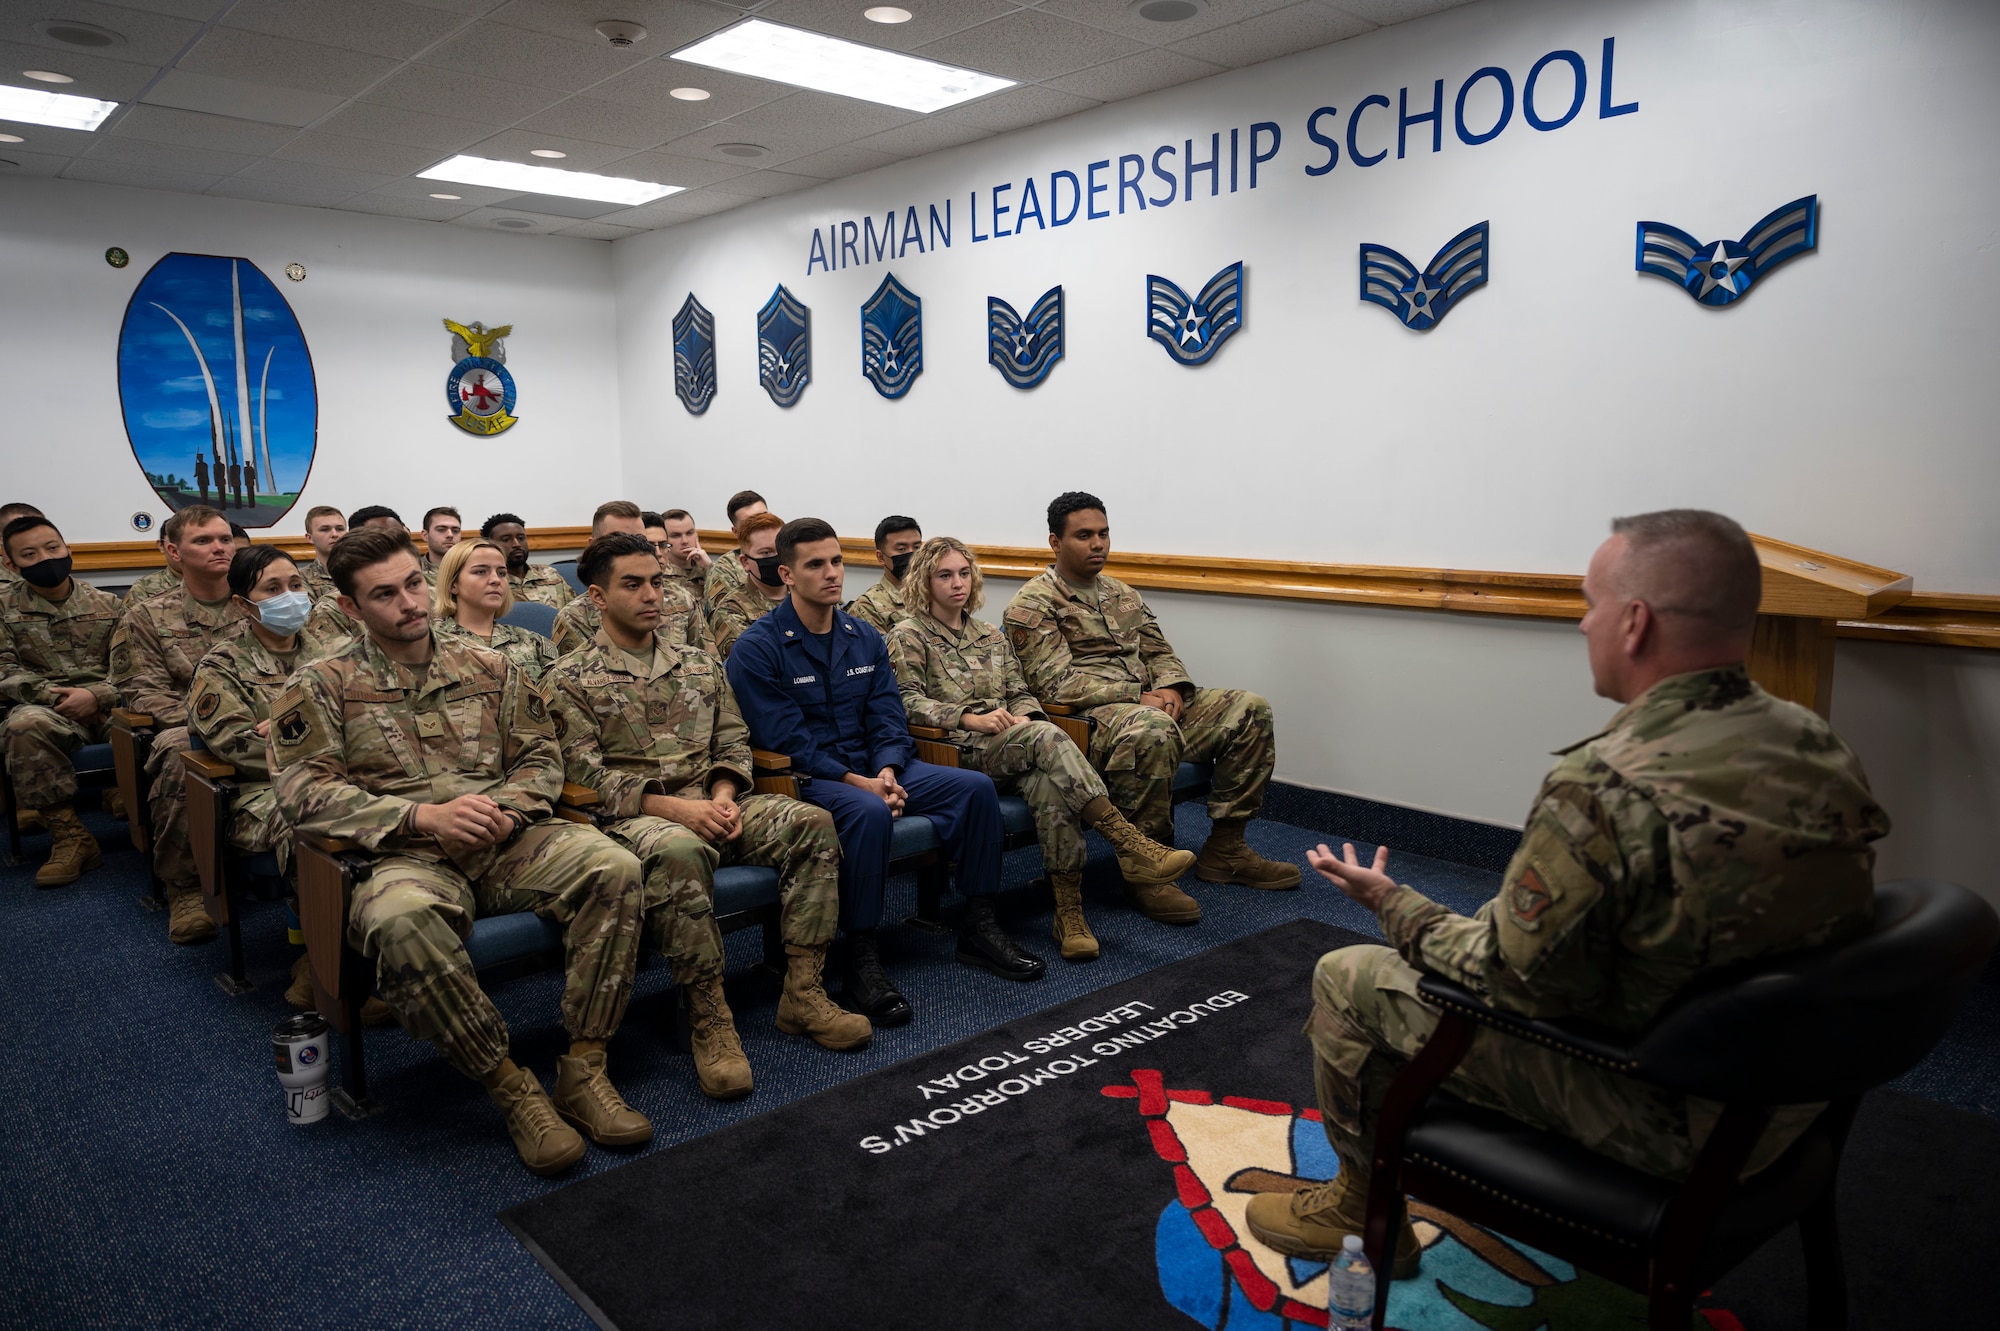 U.S. Air Force Chief Master Sgt. David R. Wolfe, Pacific Air Forces command chief, speaks with service members attending the Airman Leadership School at Andersen Air Force Base, Guam, April 14, 2022.